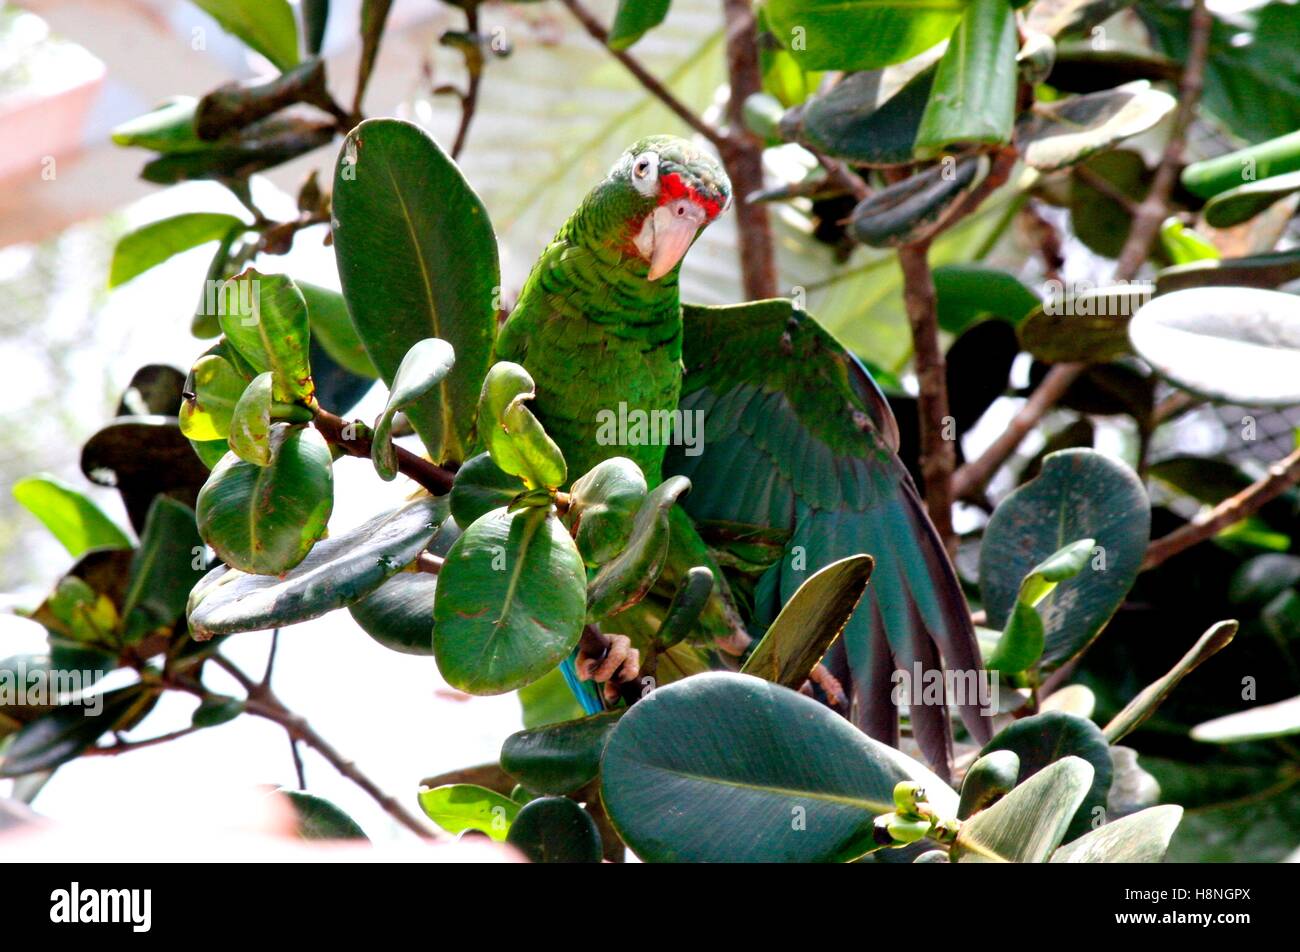 An endangered Puerto Rican parrot perches on a tree branch after being ceremonially released into the new flight cages at the El Yunque National Forest Iguaca Aviary April 28, 2007 in Rio Grande, Puerto Rico. Stock Photo